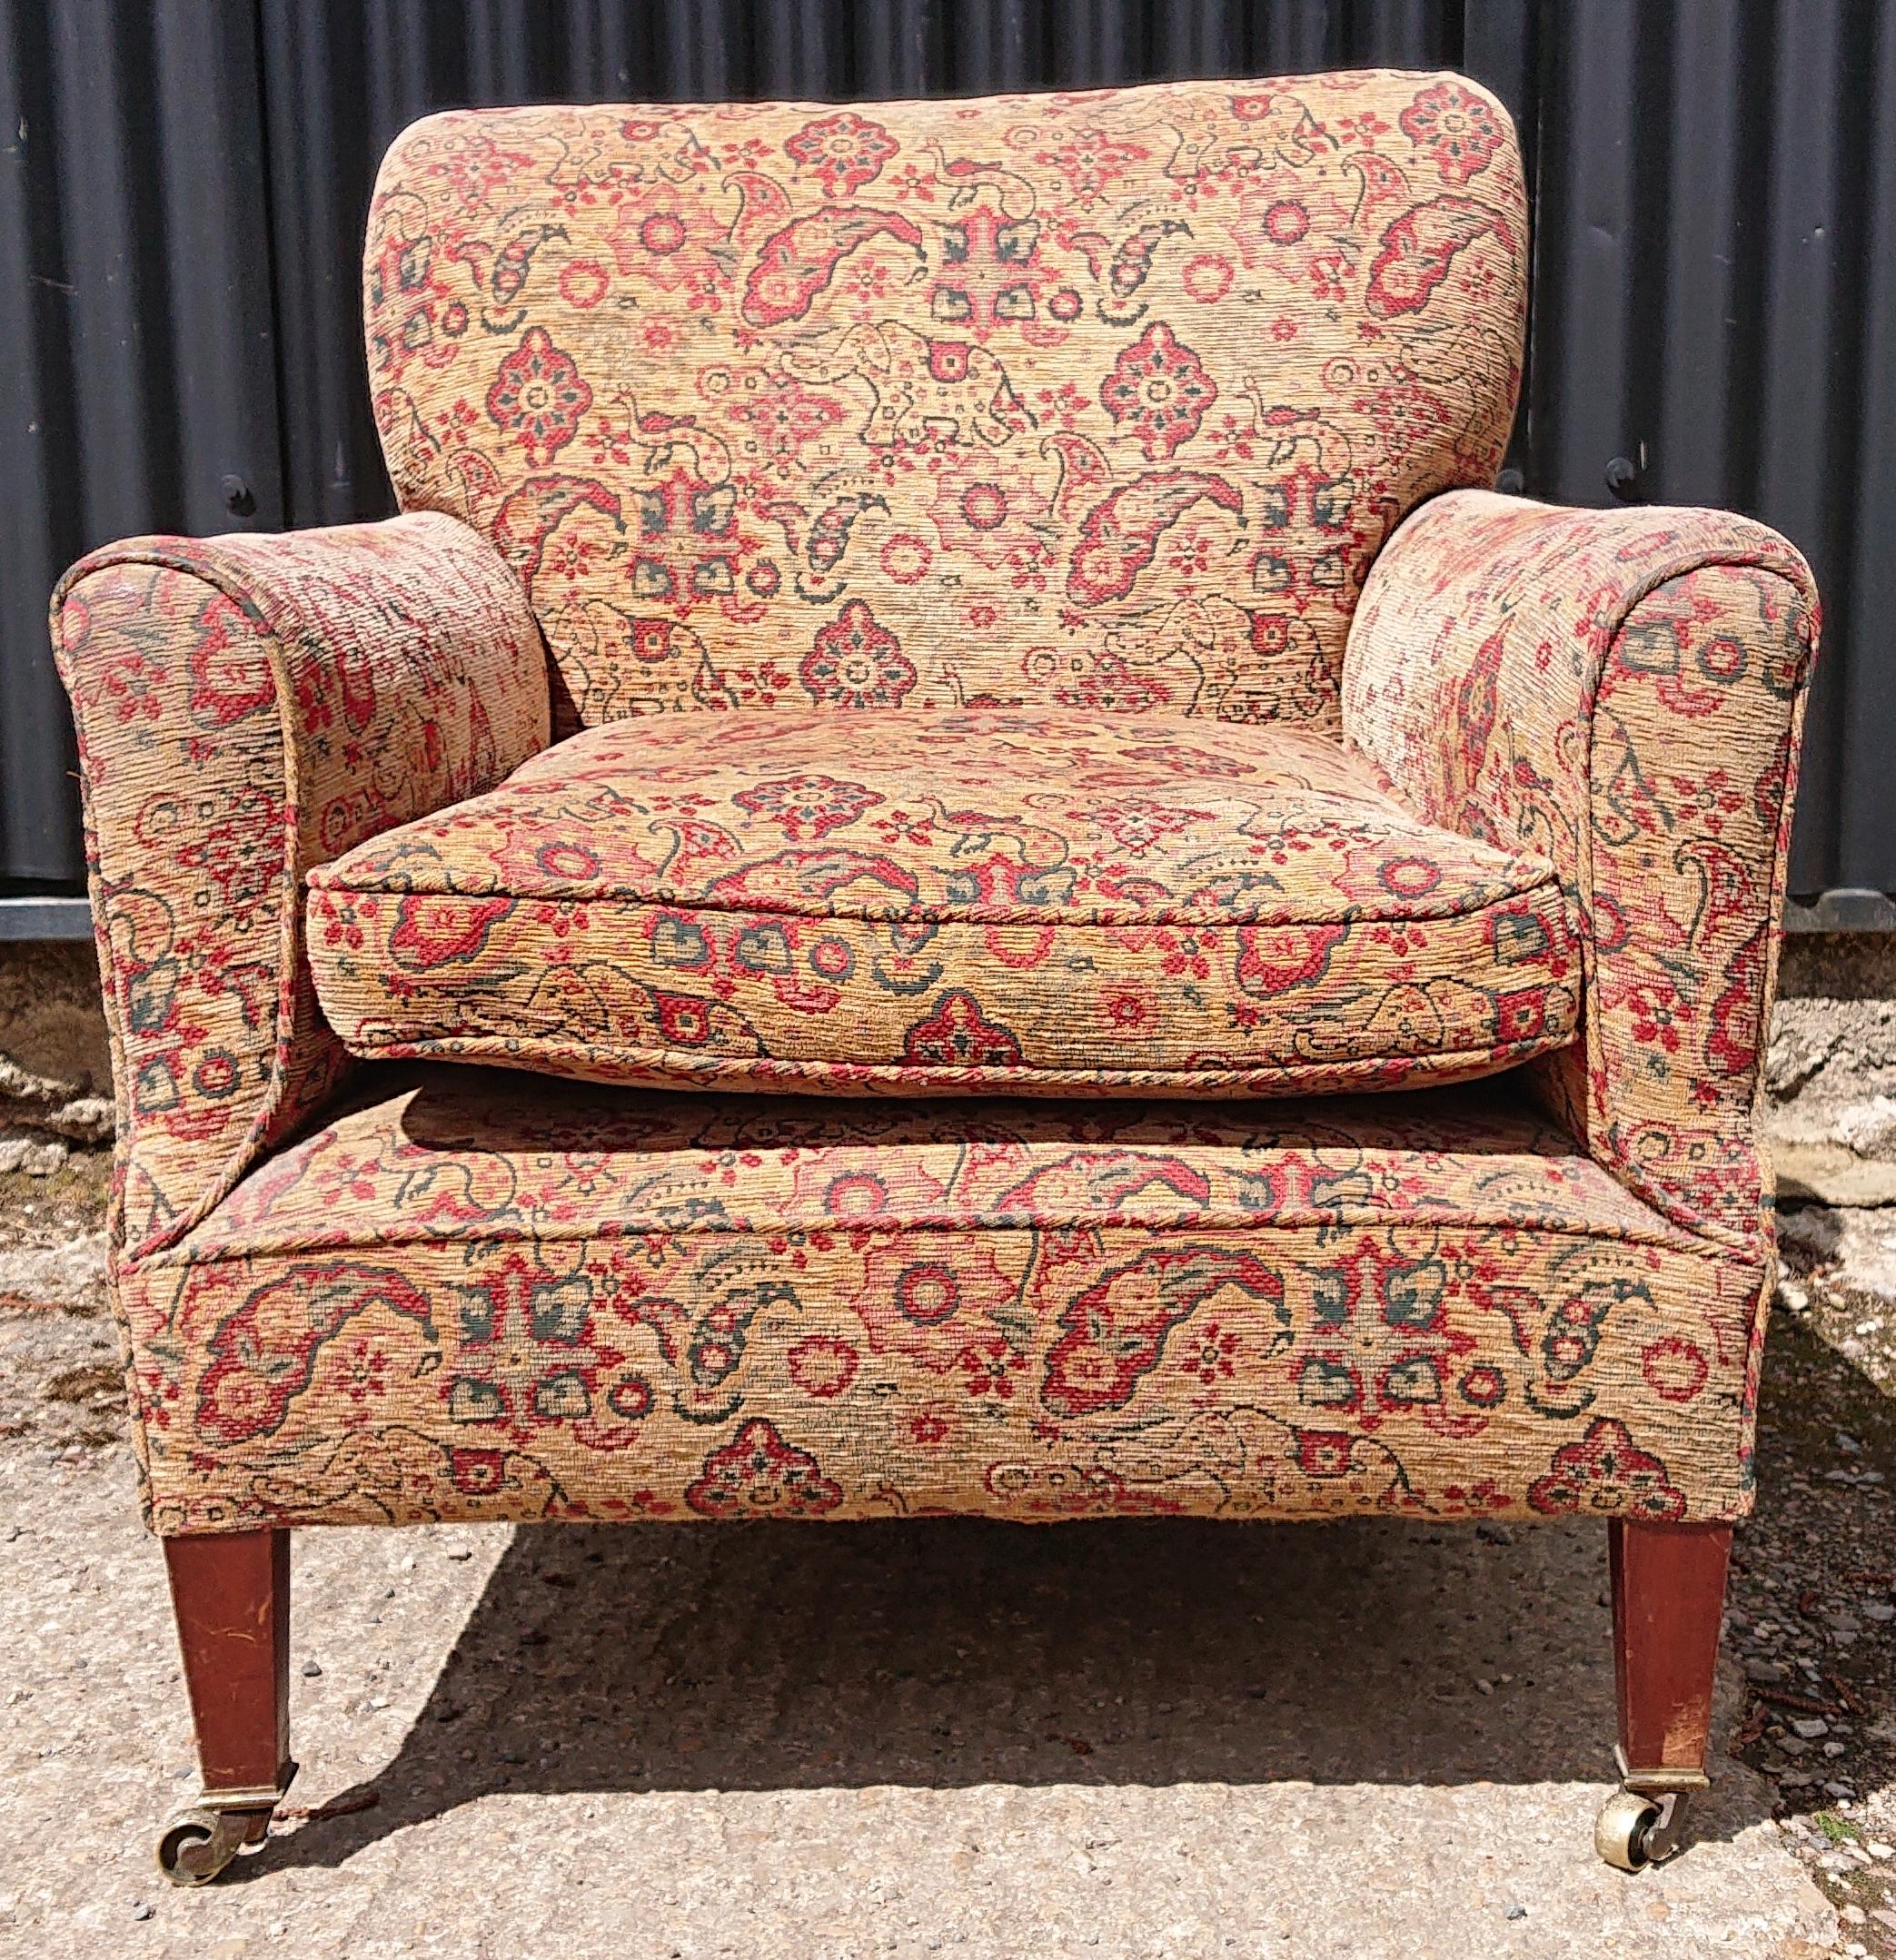 Antique chair made by Howard and Sons of London, this chair is in need of re-upholstery and the frame is a bit wobbly, but it has all the original casters. These chairs are really going up in value at the moment.
Casters stamped with the pre 